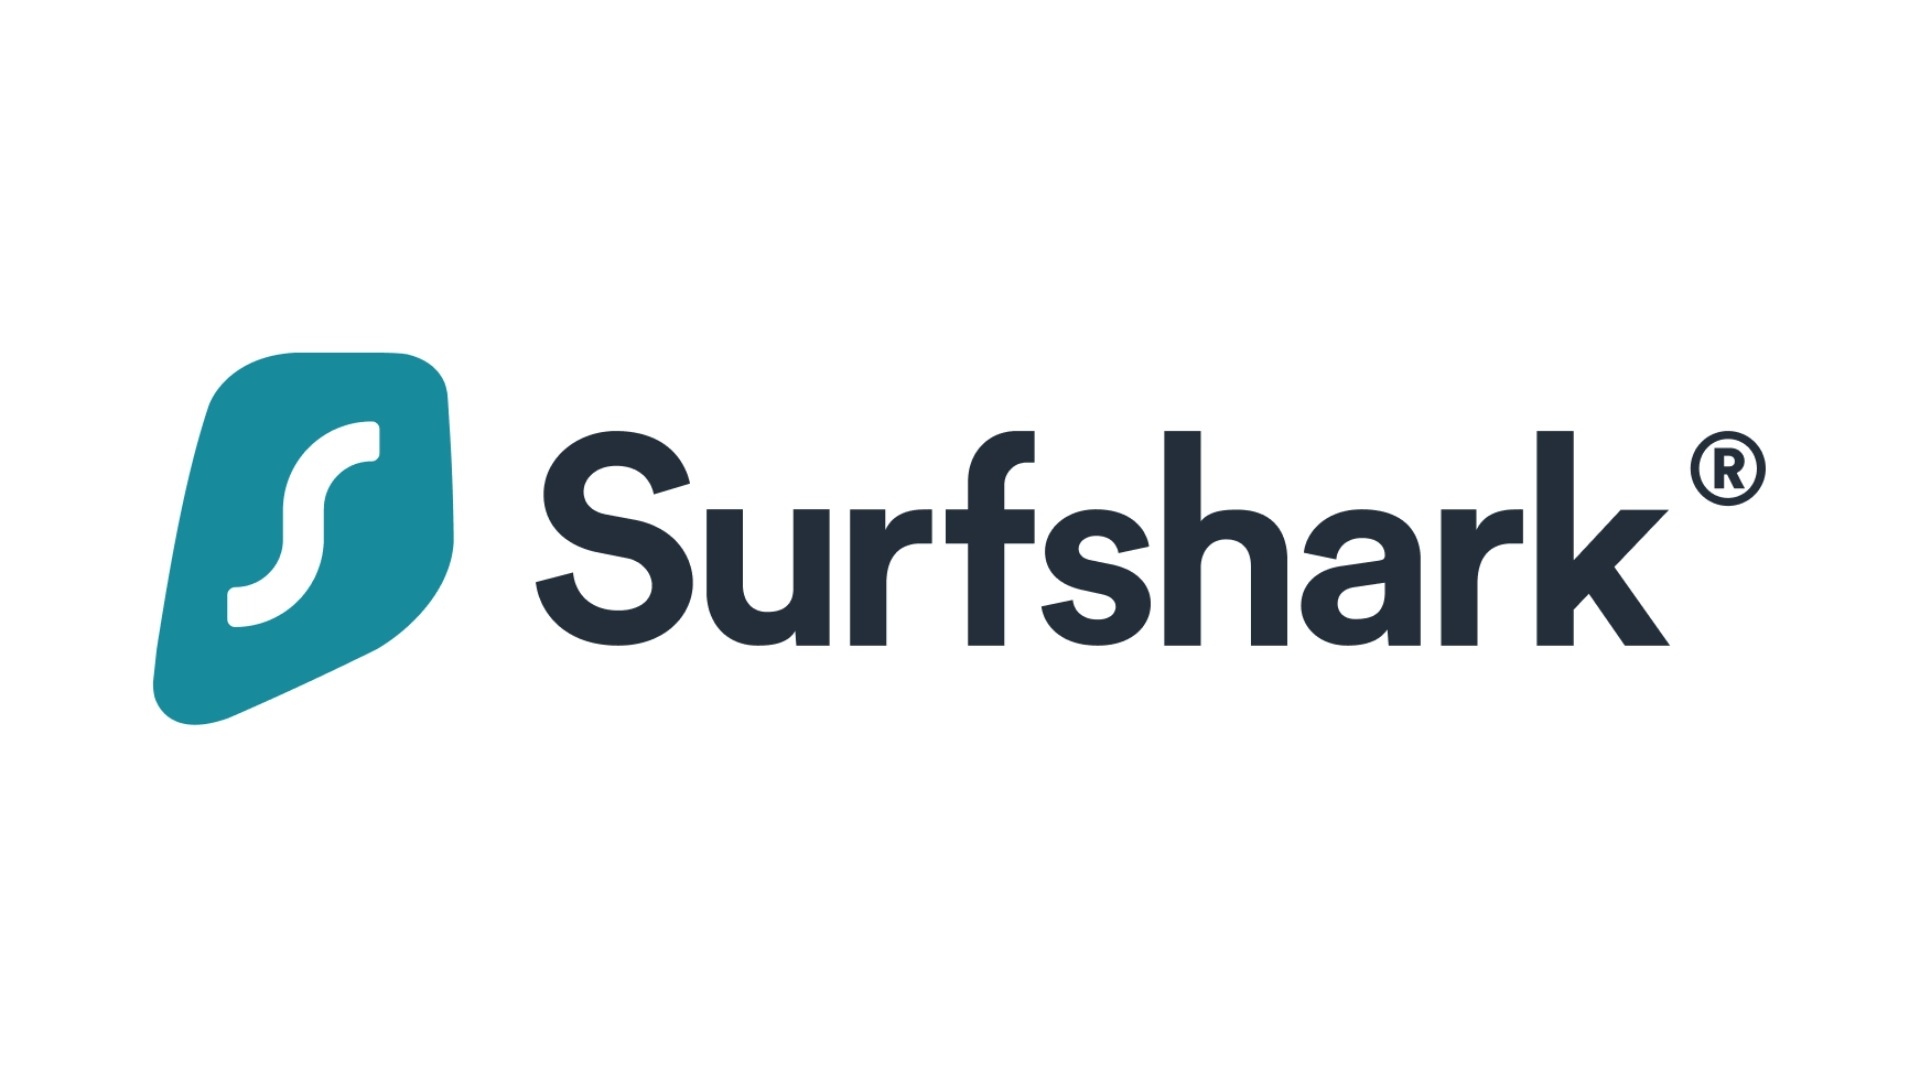 VPN costs for Surfshark. Image shows the company logo.